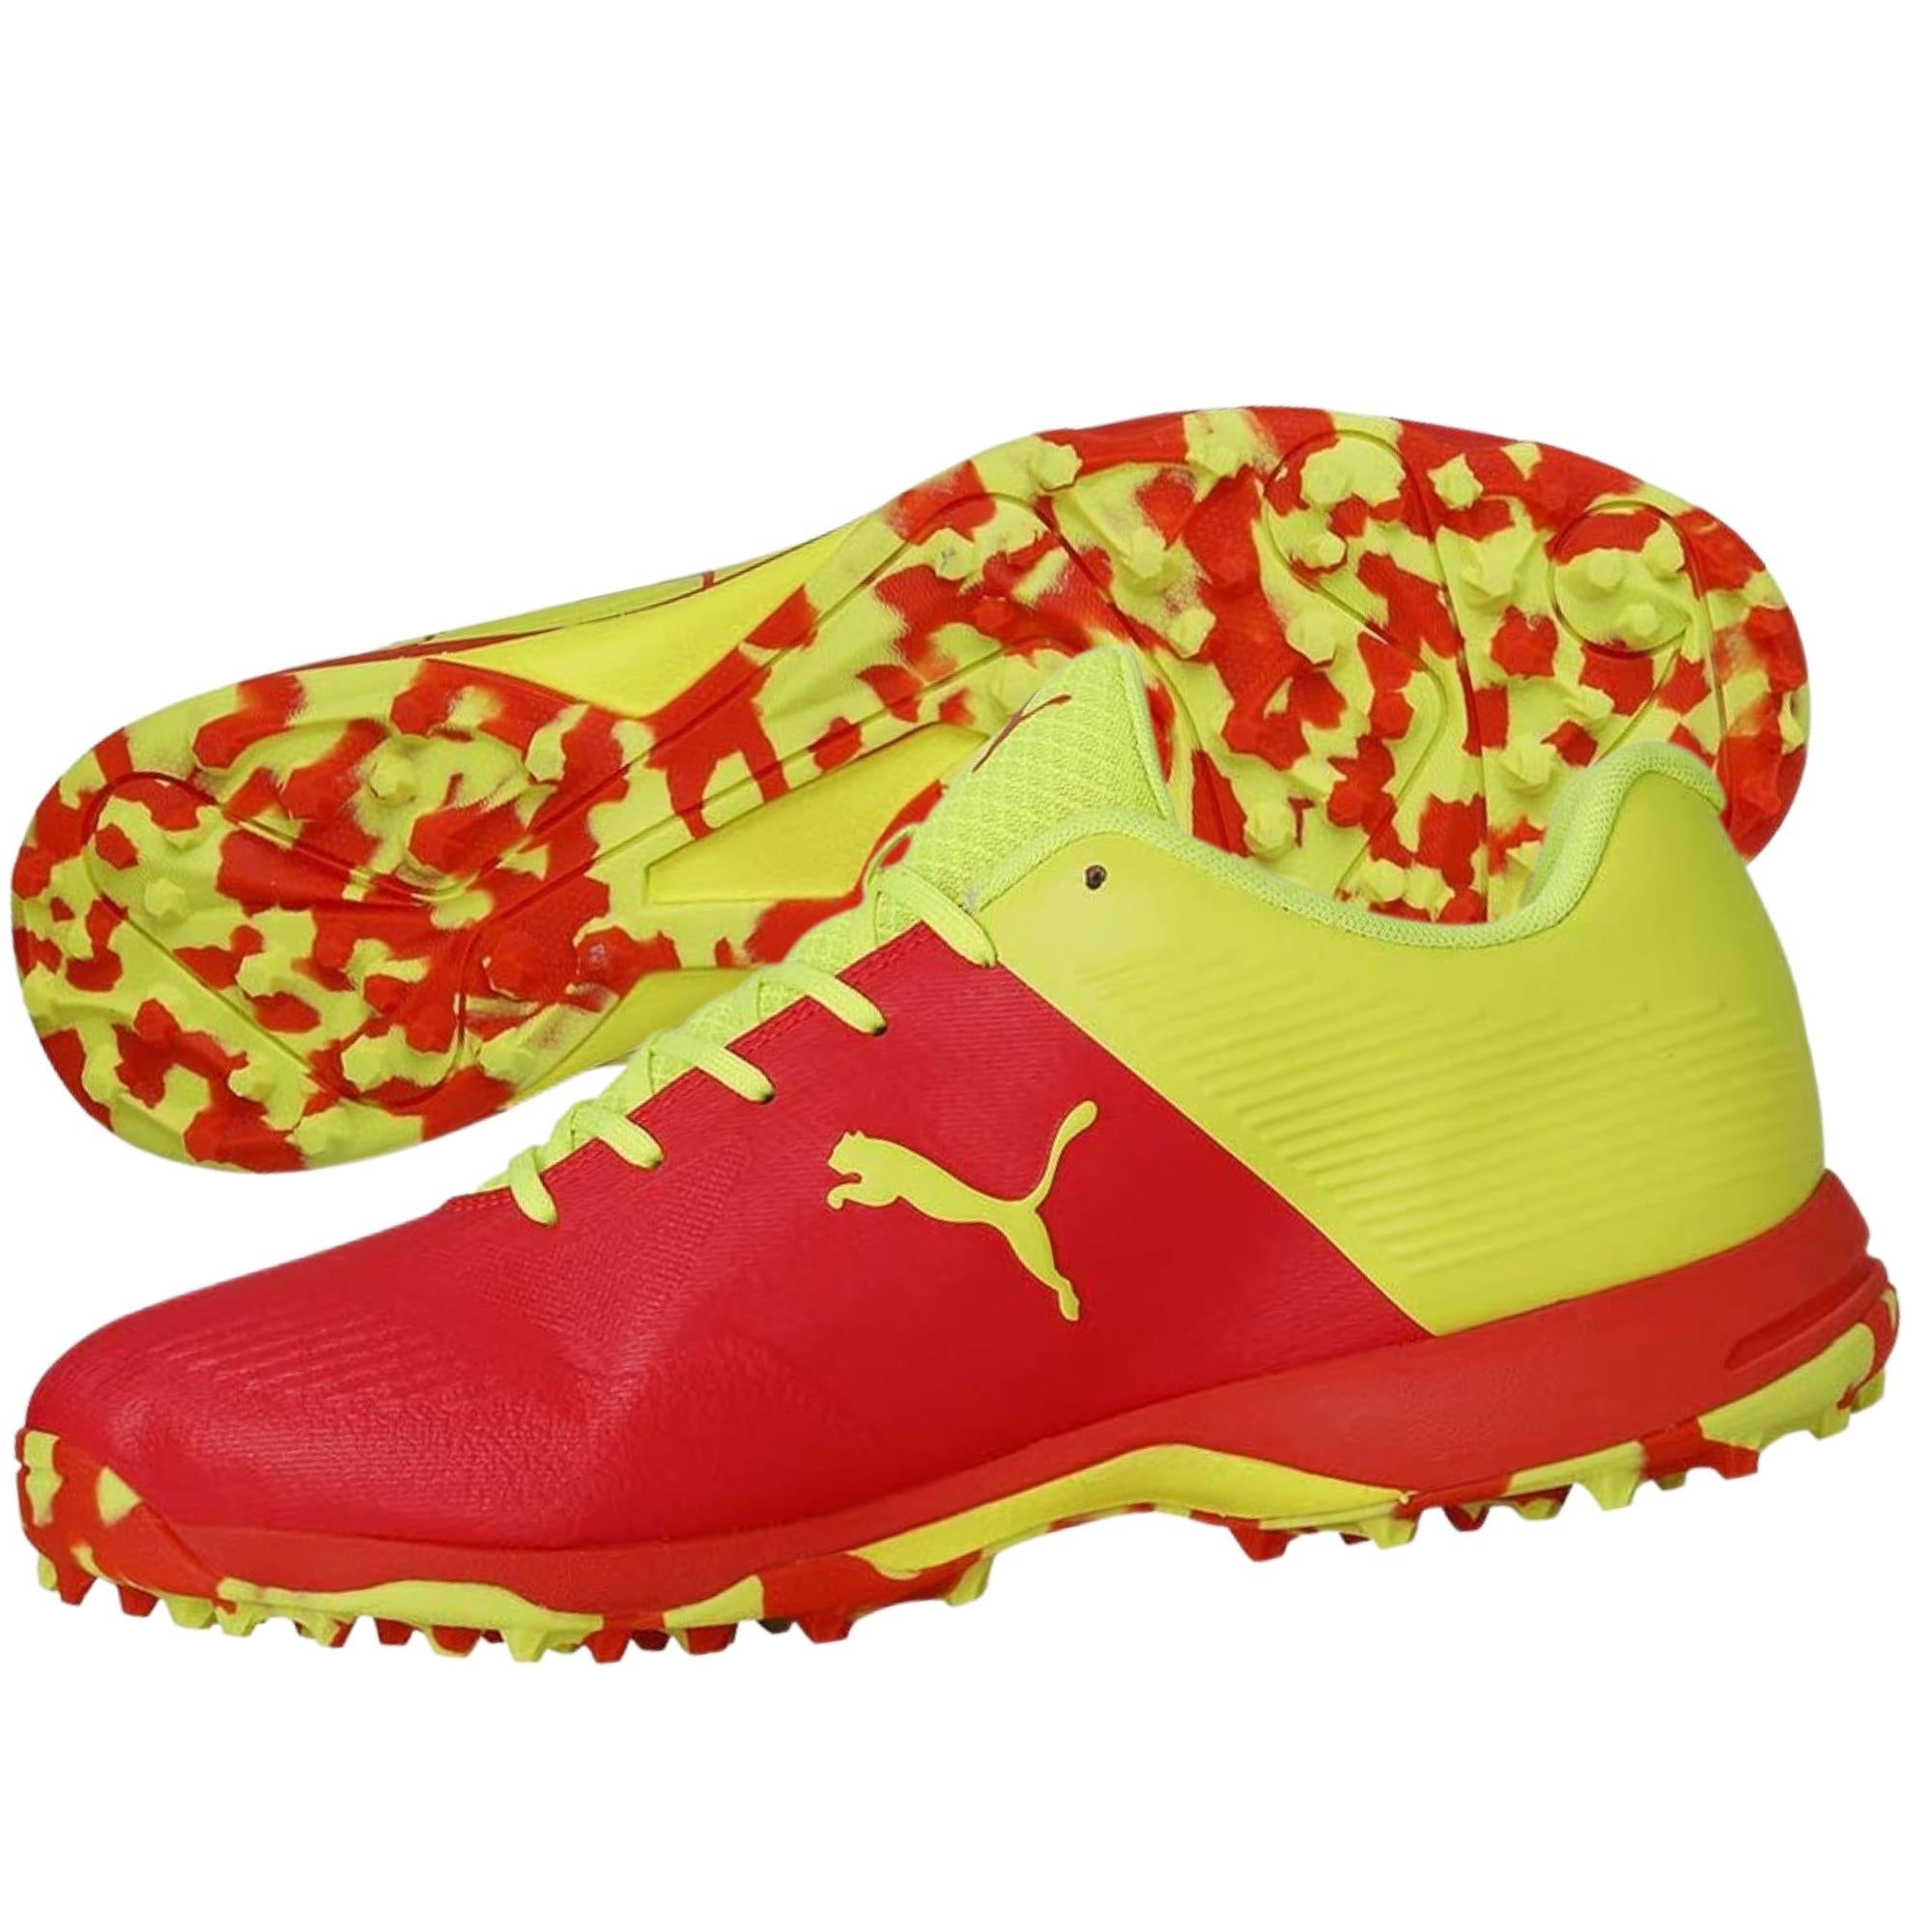 Puma Cricket Shoes One 8, Red/Yellow